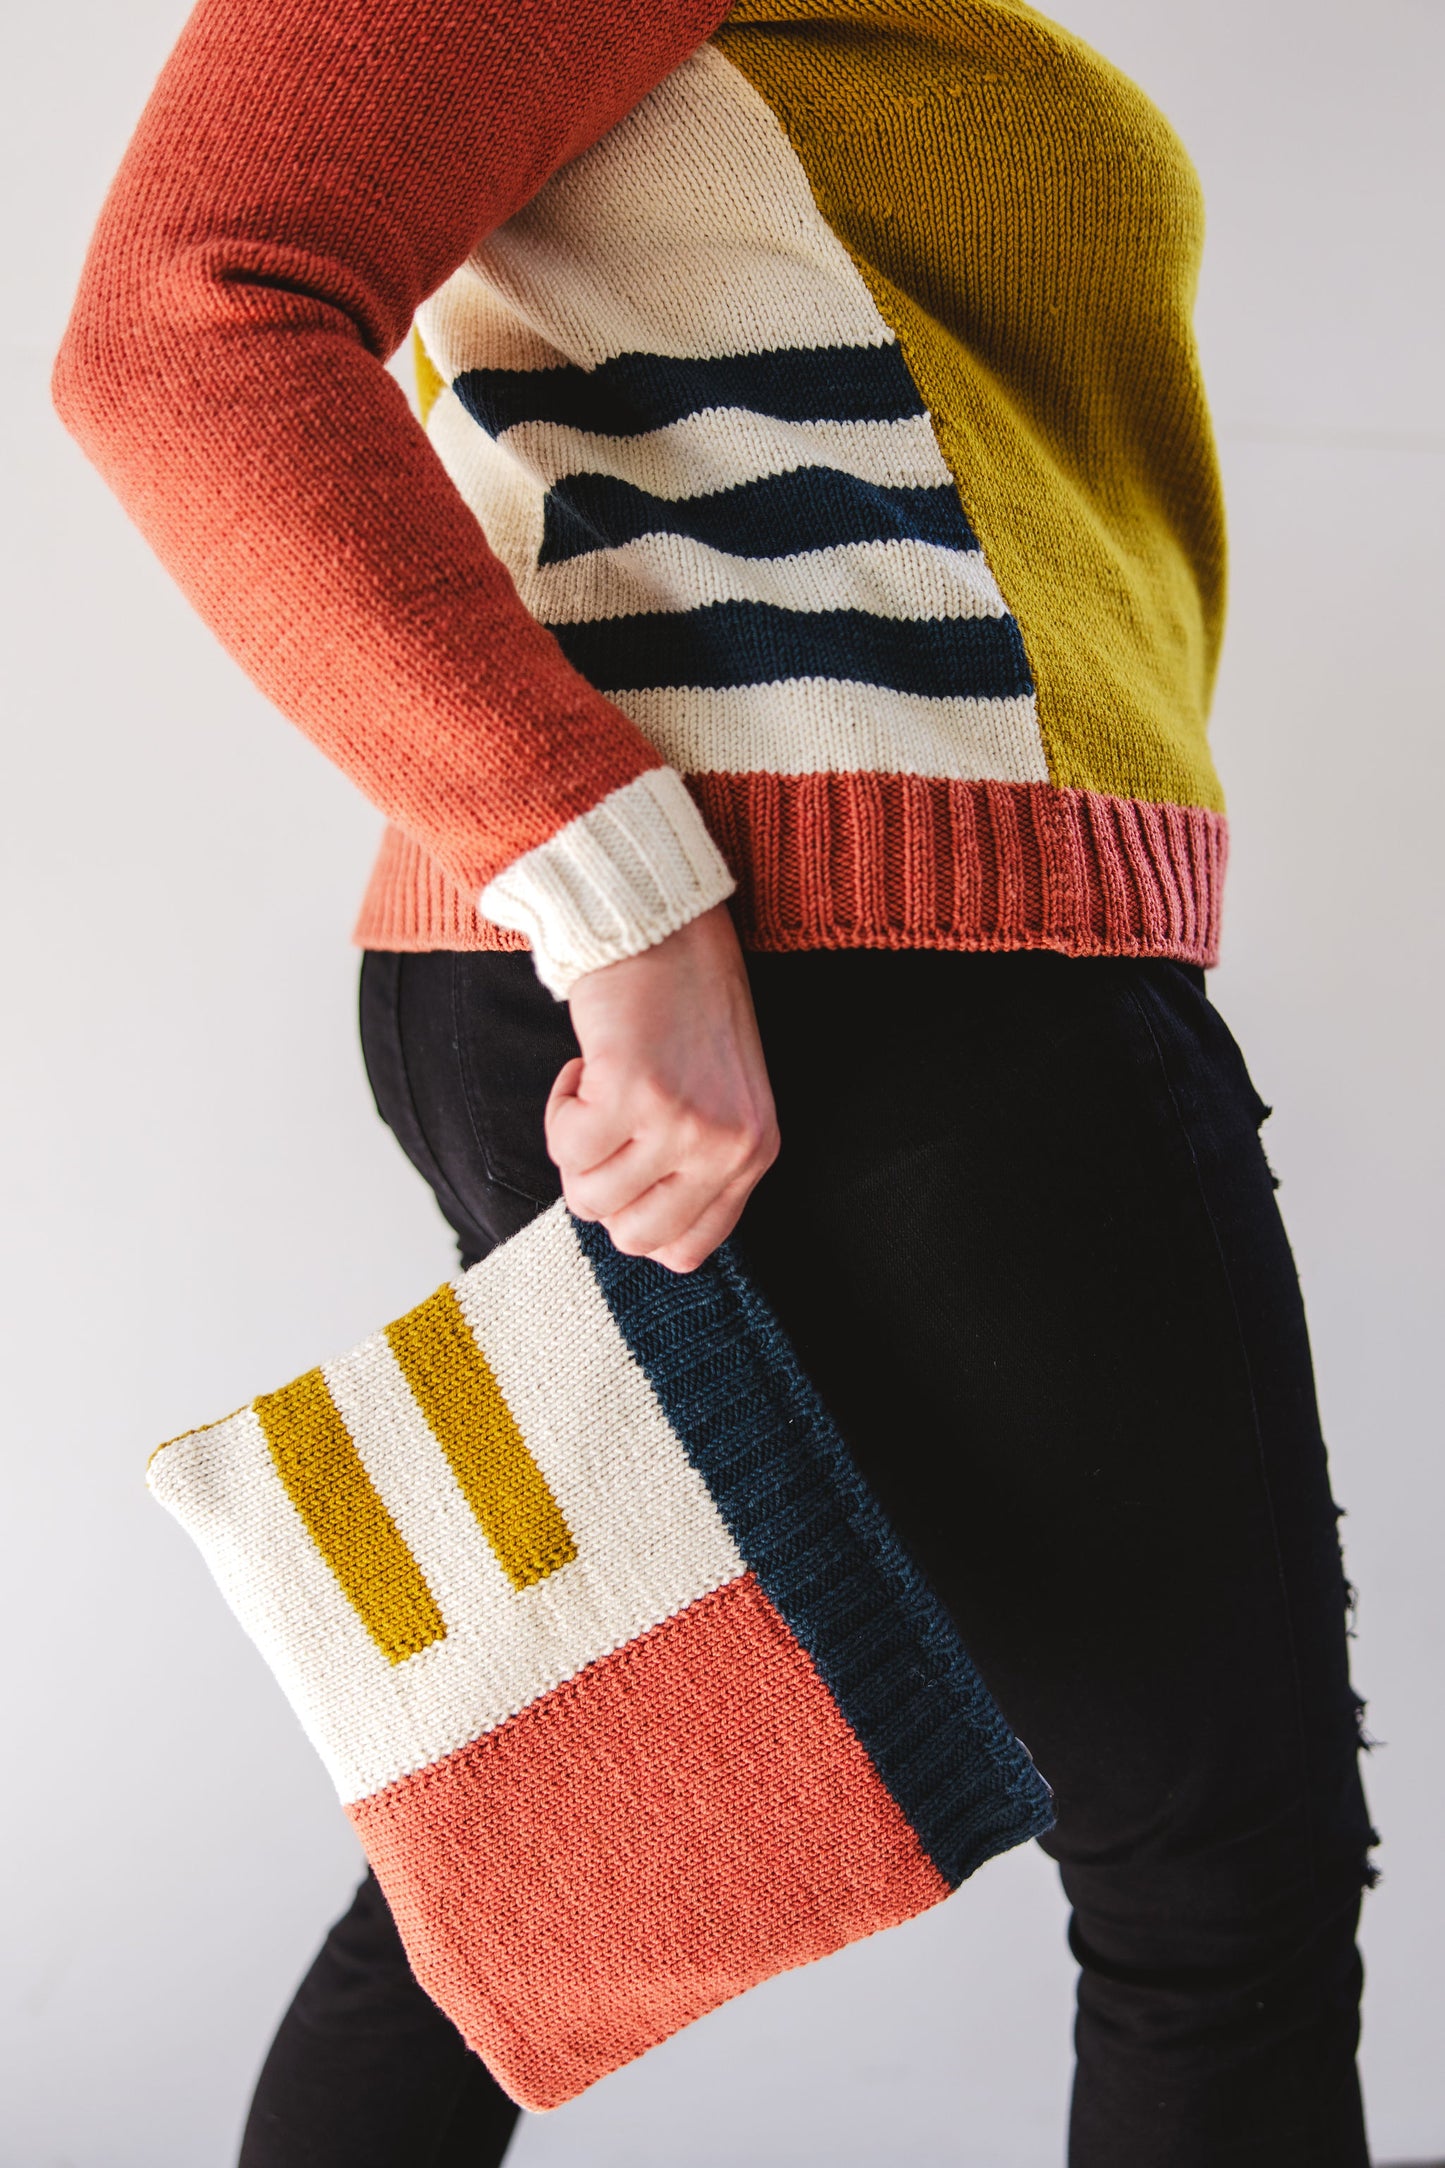 Seen from the shoulders down, Jen holds a notions case knit from navy blue, white, ochre, and pink yarn. She wears a sweater with a matching design in the same colours, both knit using intarsia knitting techniques.